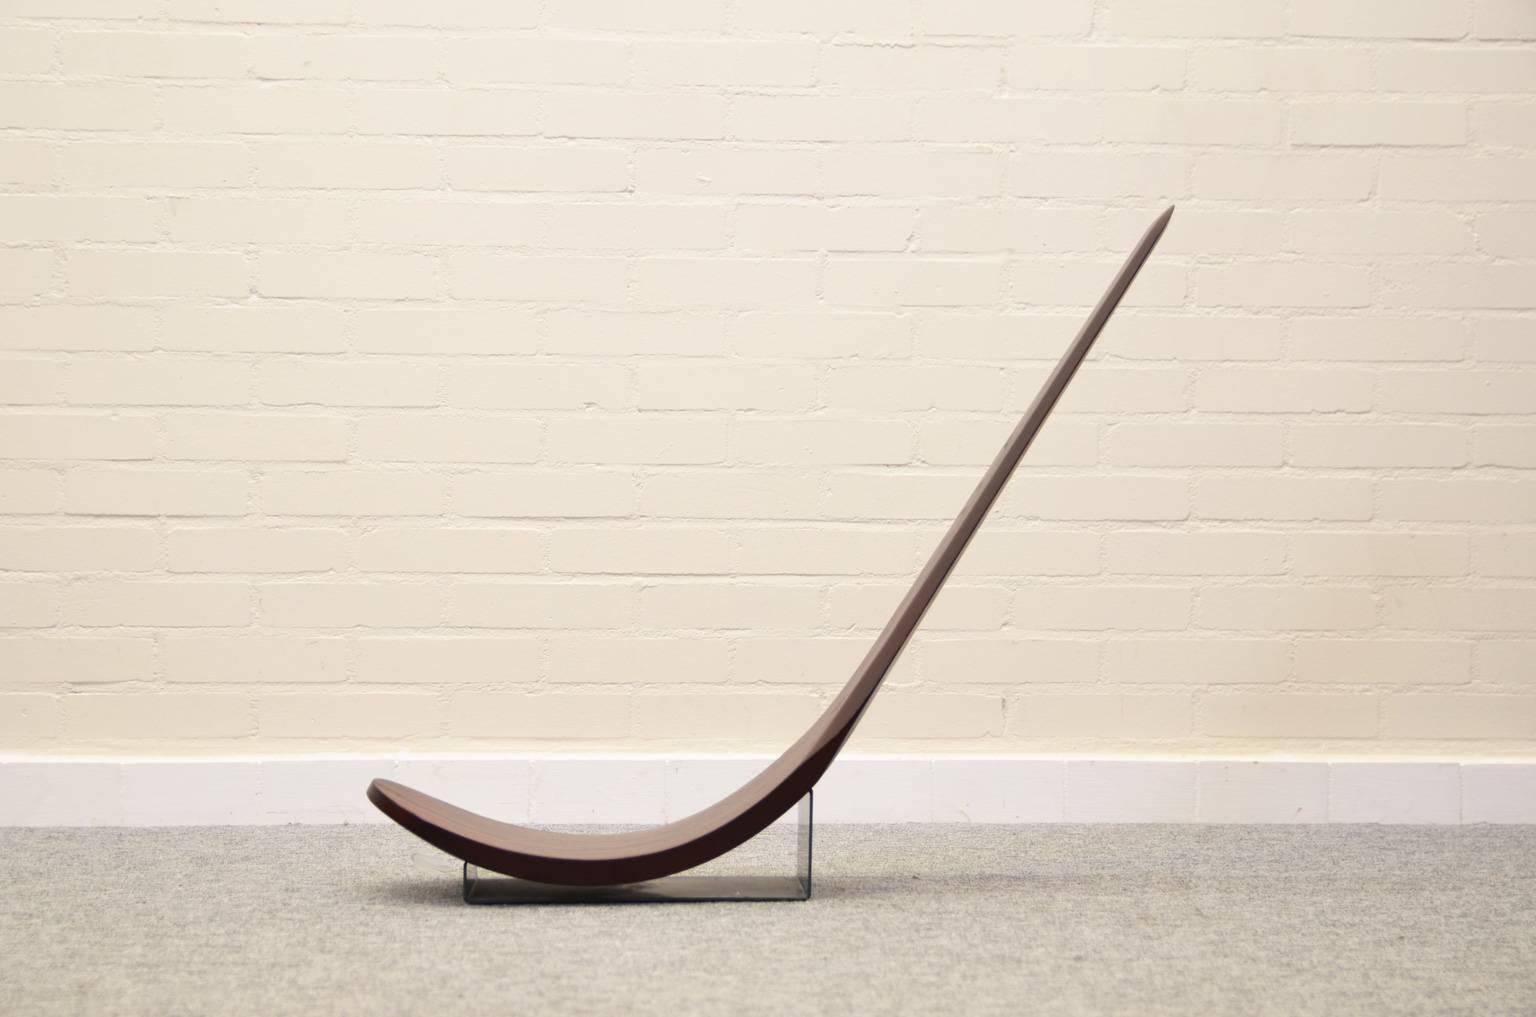 The chip is a 'chair,' although very small, low and not very comfortable to sit in. It is more an object or sculpture. Not surprisingly, the designer, Carlo Mo, is a sculptor by profession. The 'sculpture' was conceived at the Centro Progetti Tecno,